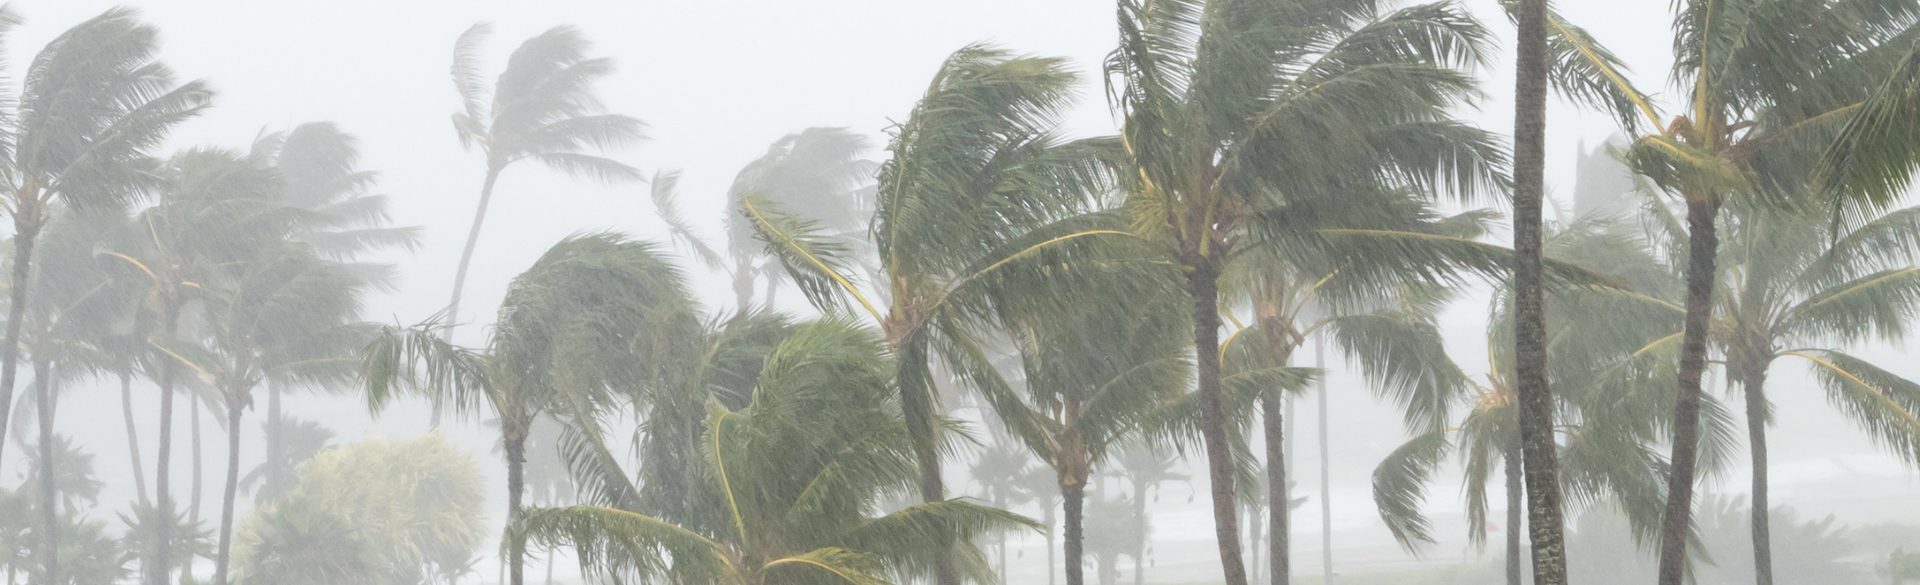 What are the Potential Human Health Impacts of Hurricane Ian’s Massive Destruction?